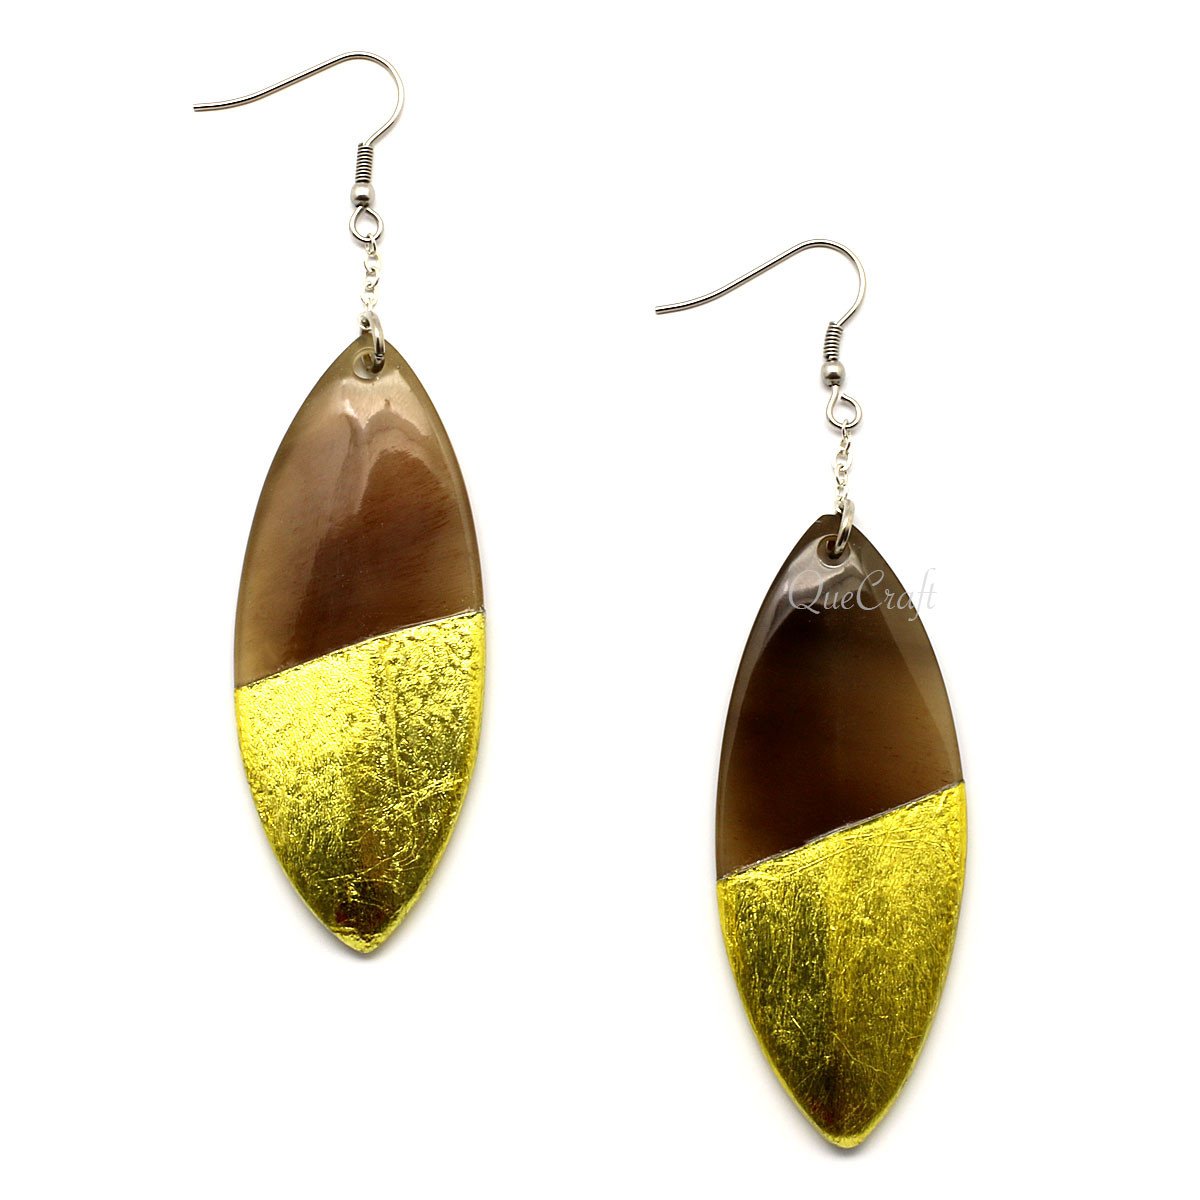 Horn & Lacquer Earrings #5070 - HORN JEWELRY